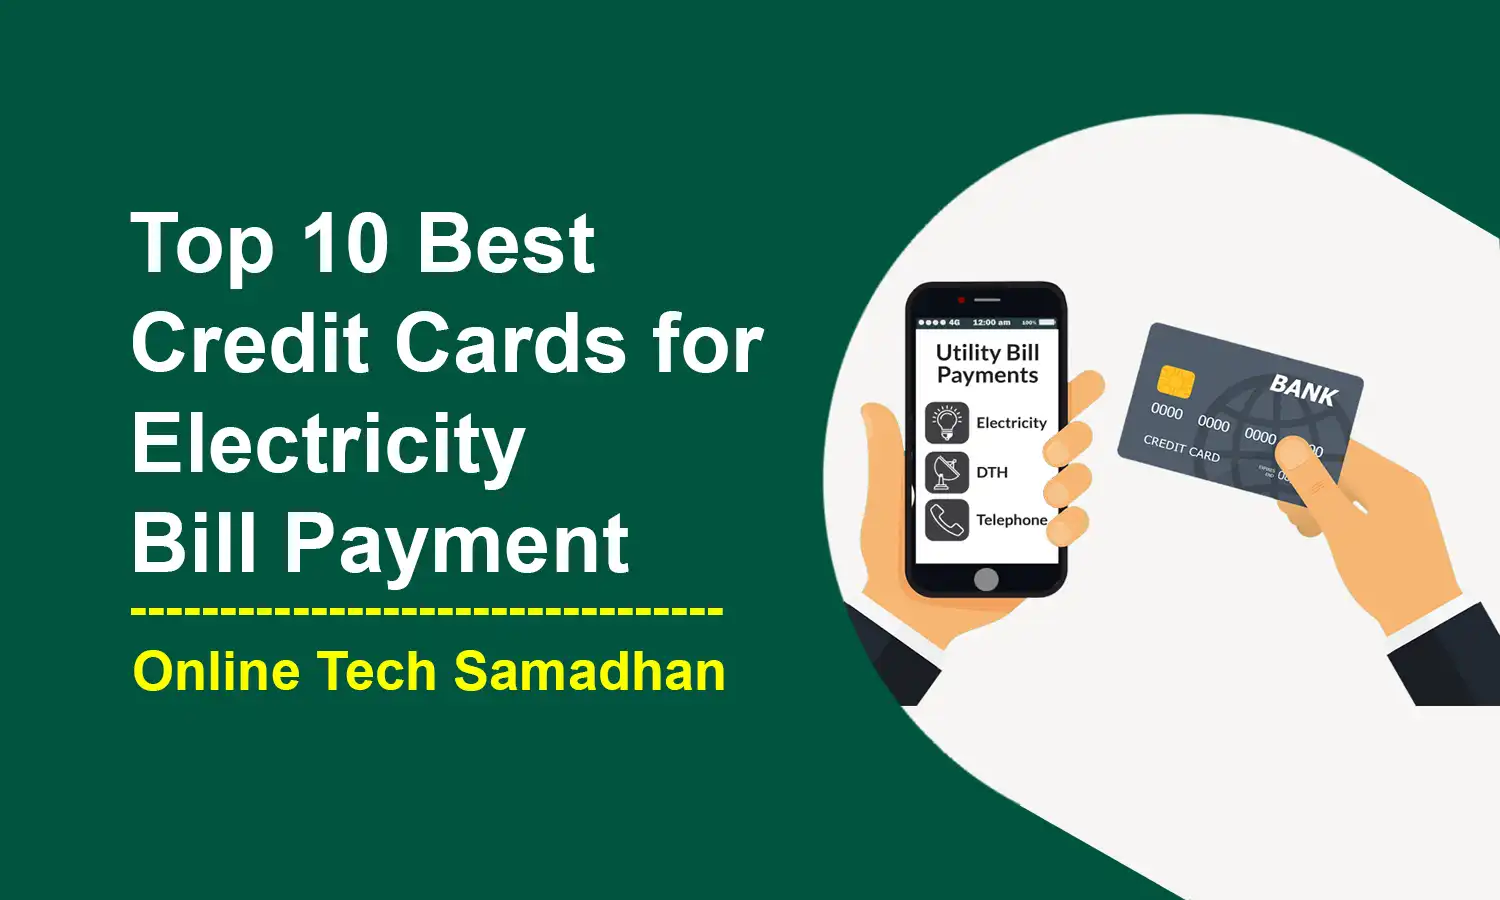 Best Credit Cards for Electricity Bill Payment